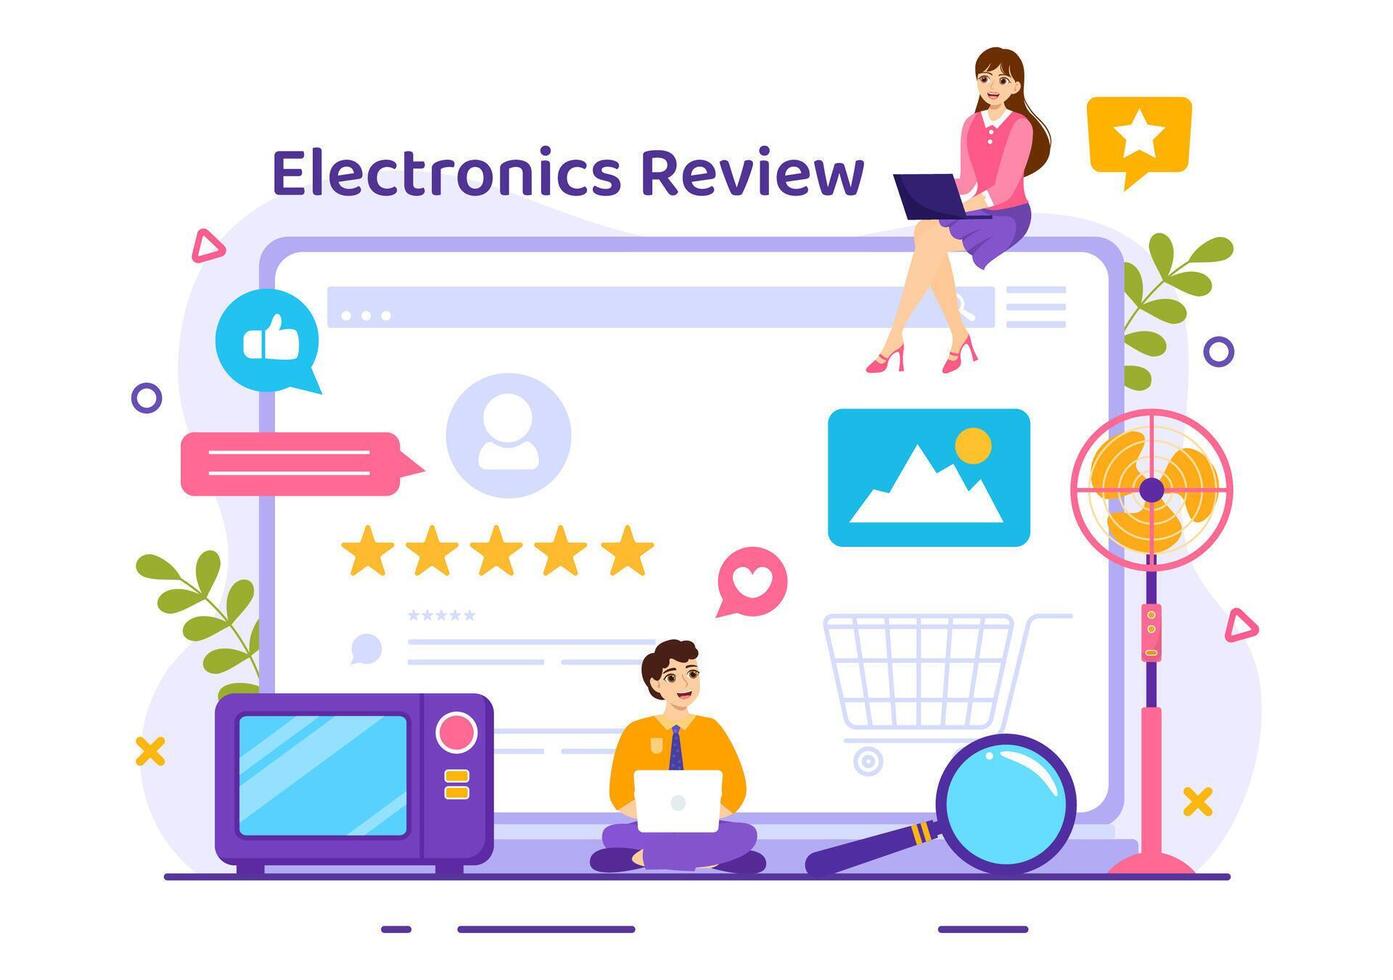 Electronics Review Vector Illustration with Customer Rating Quality of Service or Application and Provide Feedback in Flat Cartoon Background